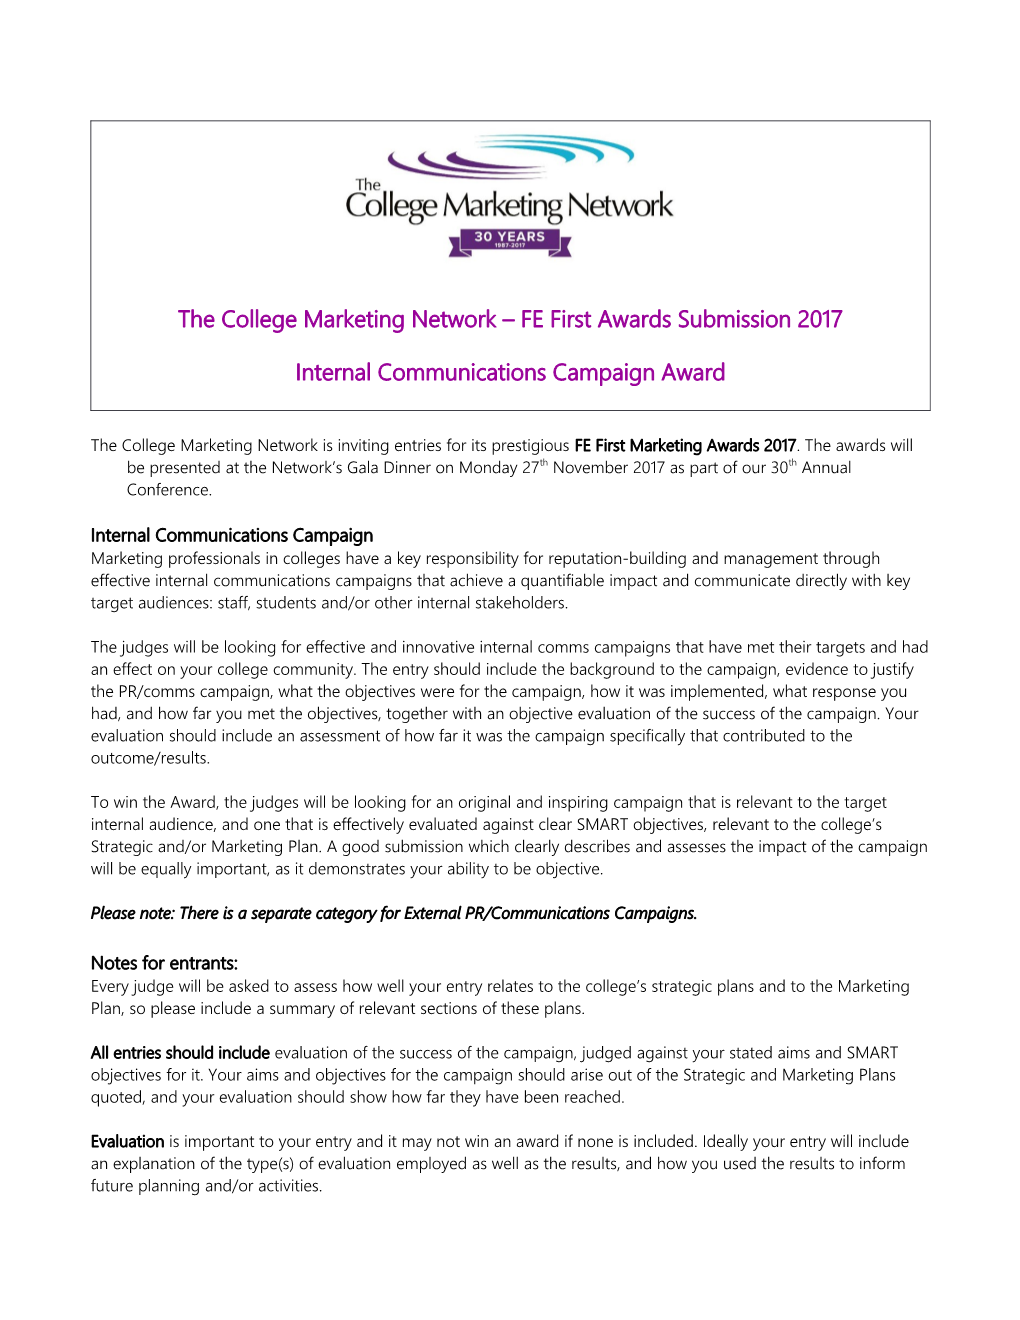 Marketing Network FE First Awards Submission 2010